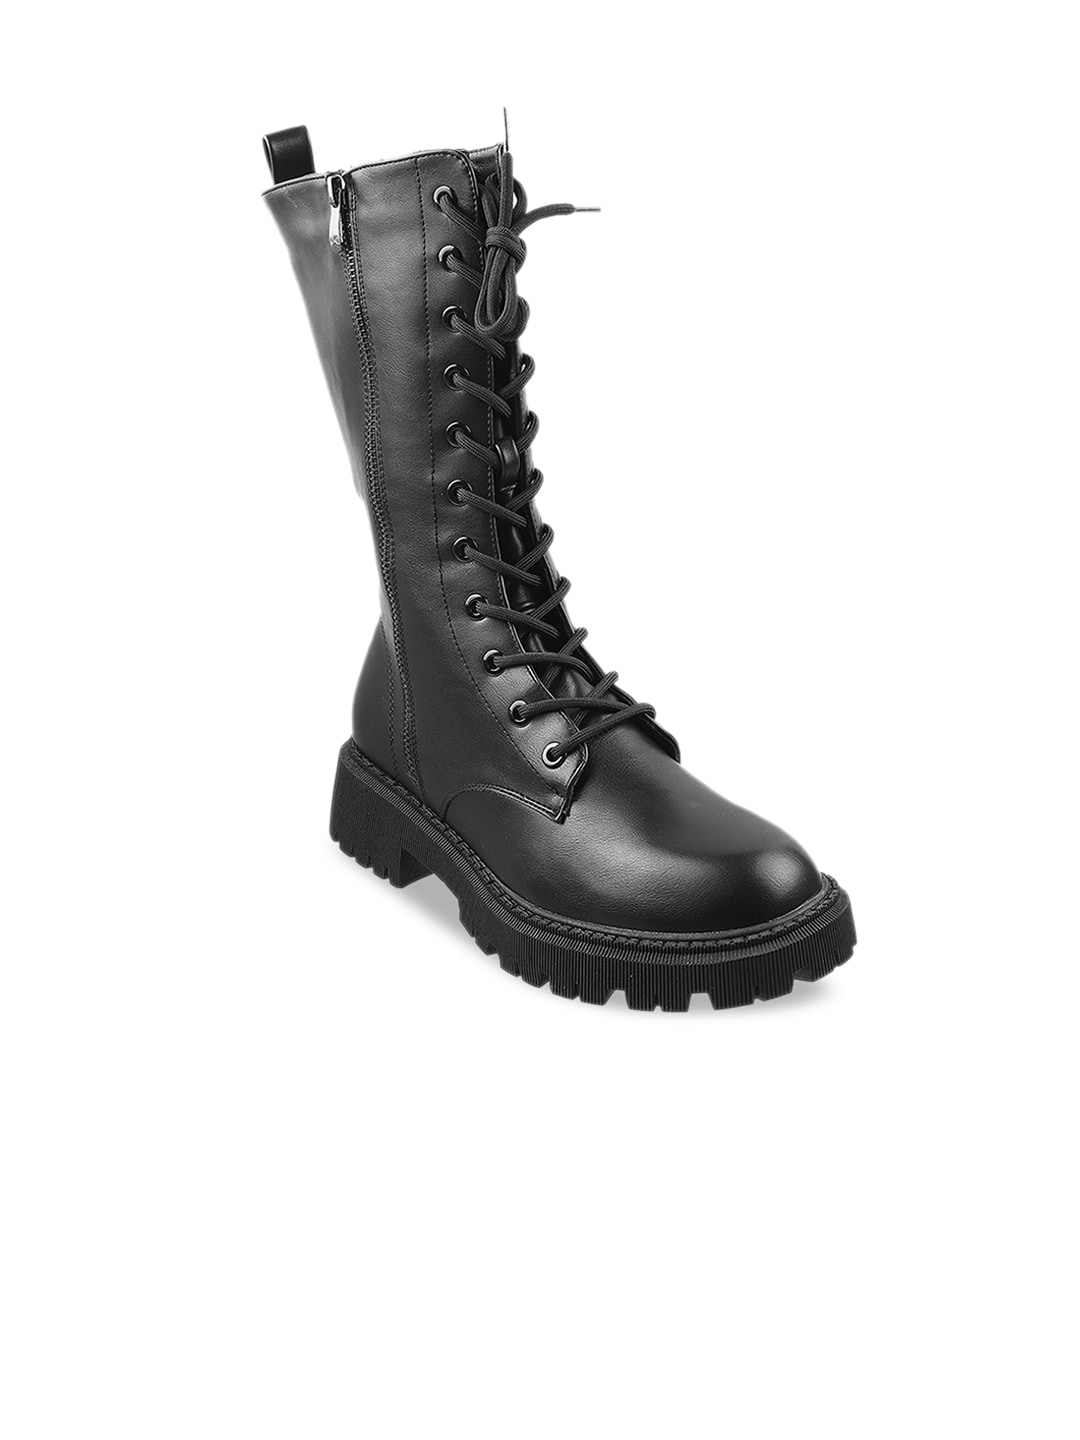 Mochi Black Block Heeled Boots Price in India